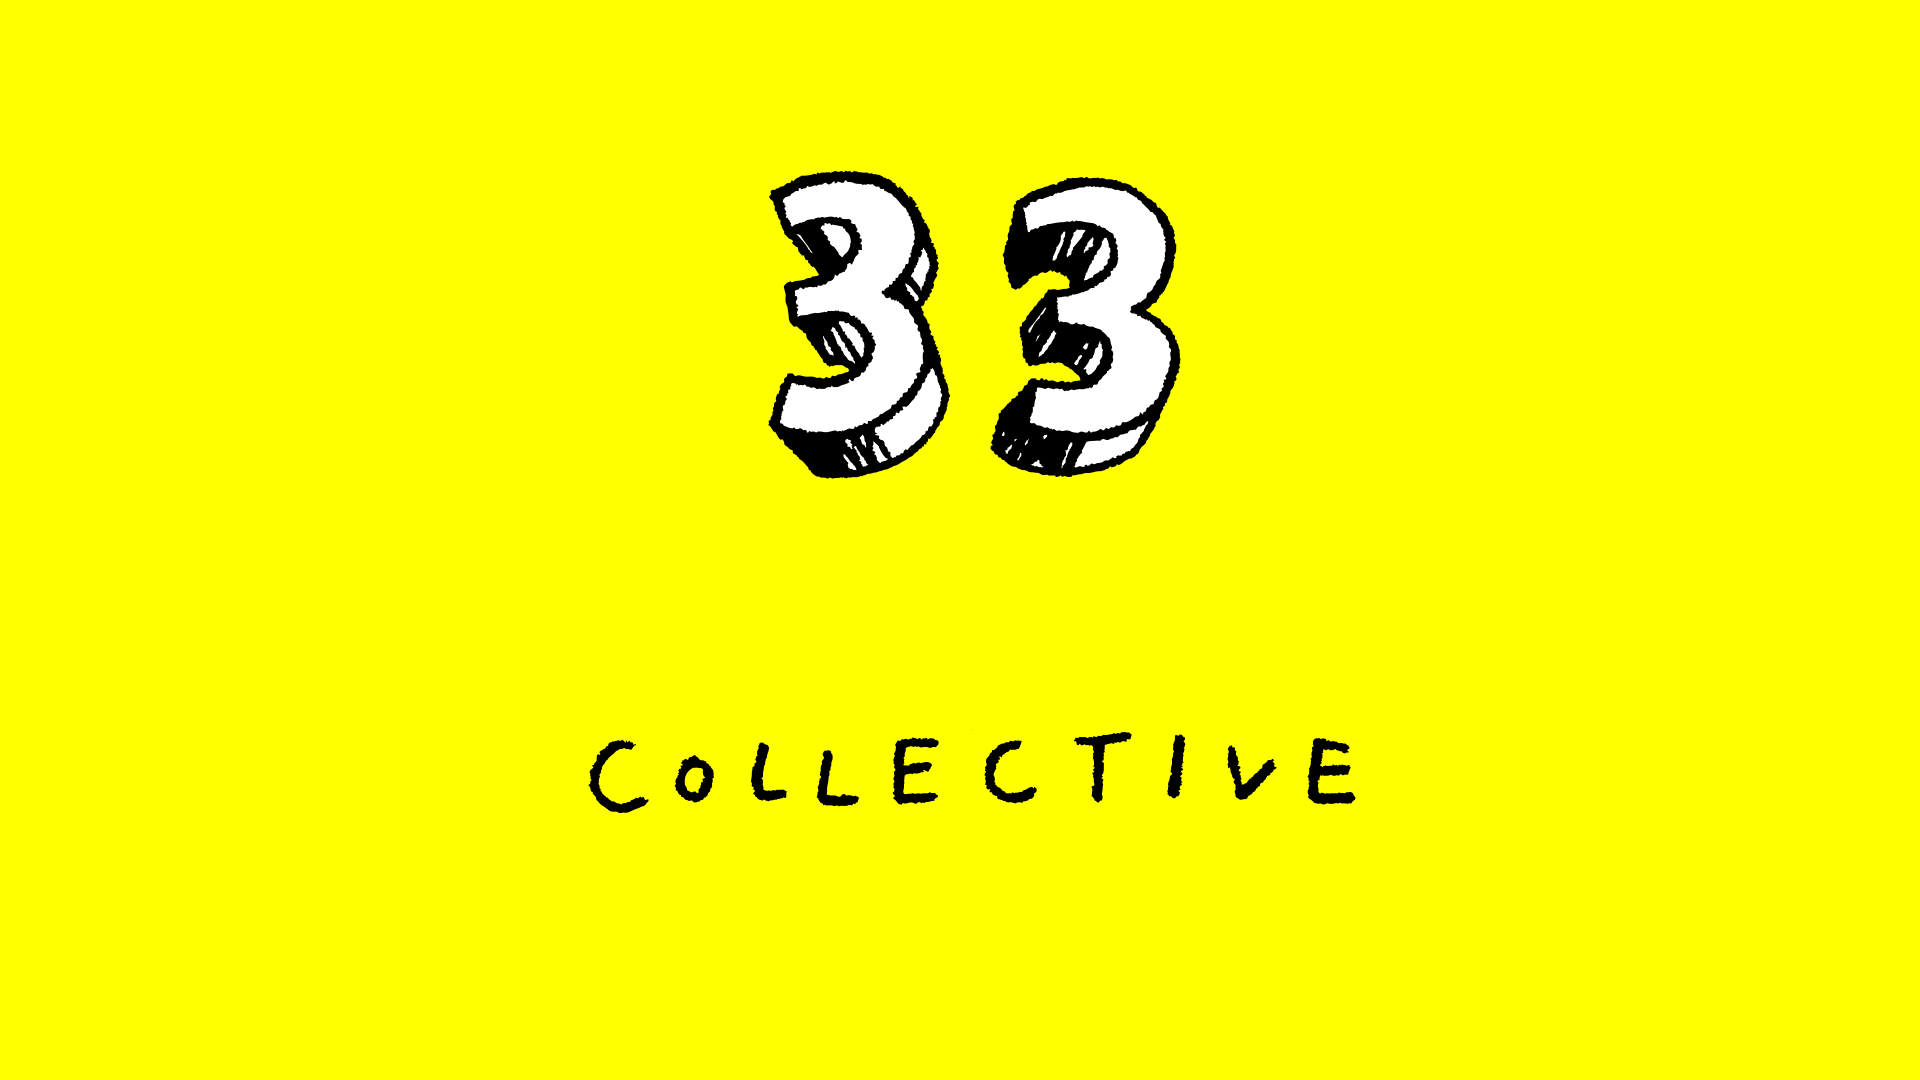 33 COLLECTIVE